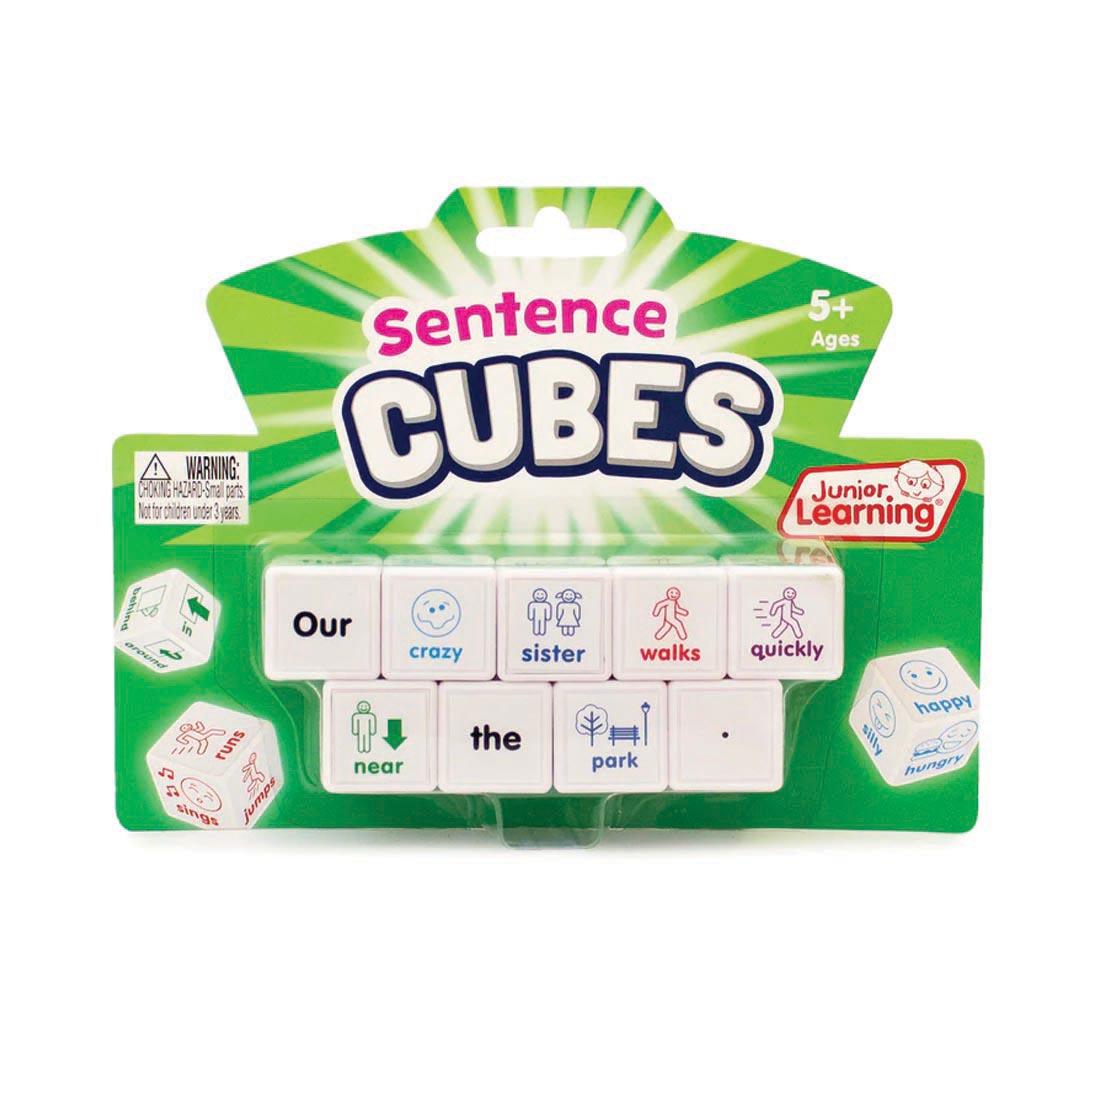 Sentence Cubes By Junior Learning in package